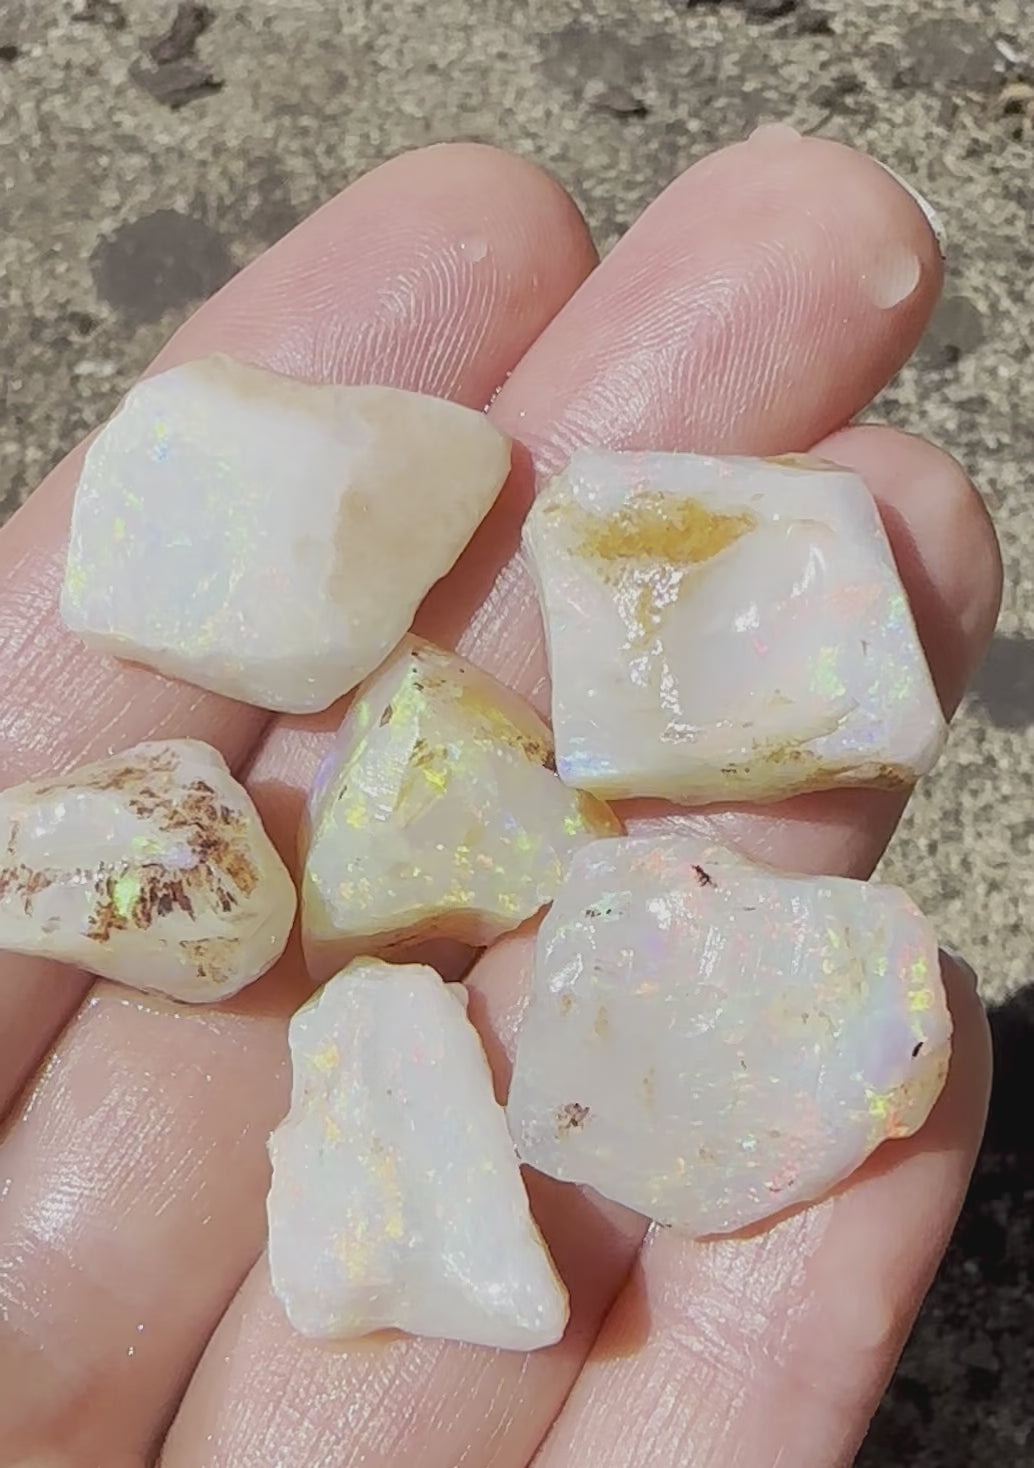 Sizes from largest to smallest opal